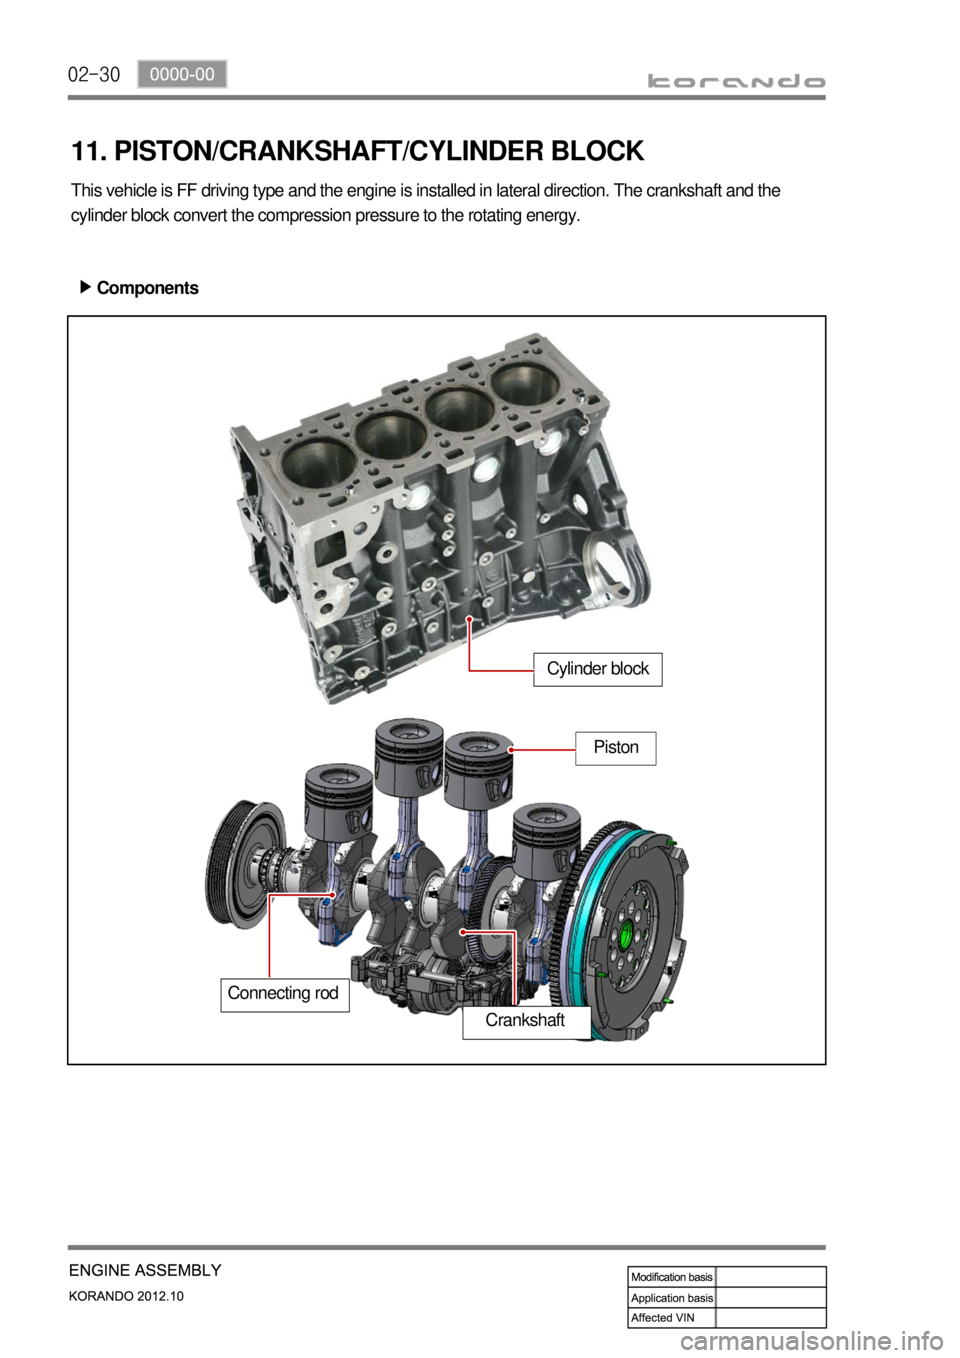 SSANGYONG KORANDO 2012  Service Manual 02-30
11. PISTON/CRANKSHAFT/CYLINDER BLOCK
This vehicle is FF driving type and the engine is installed in lateral direction. The crankshaft and the 
cylinder block convert the compression pressure to 